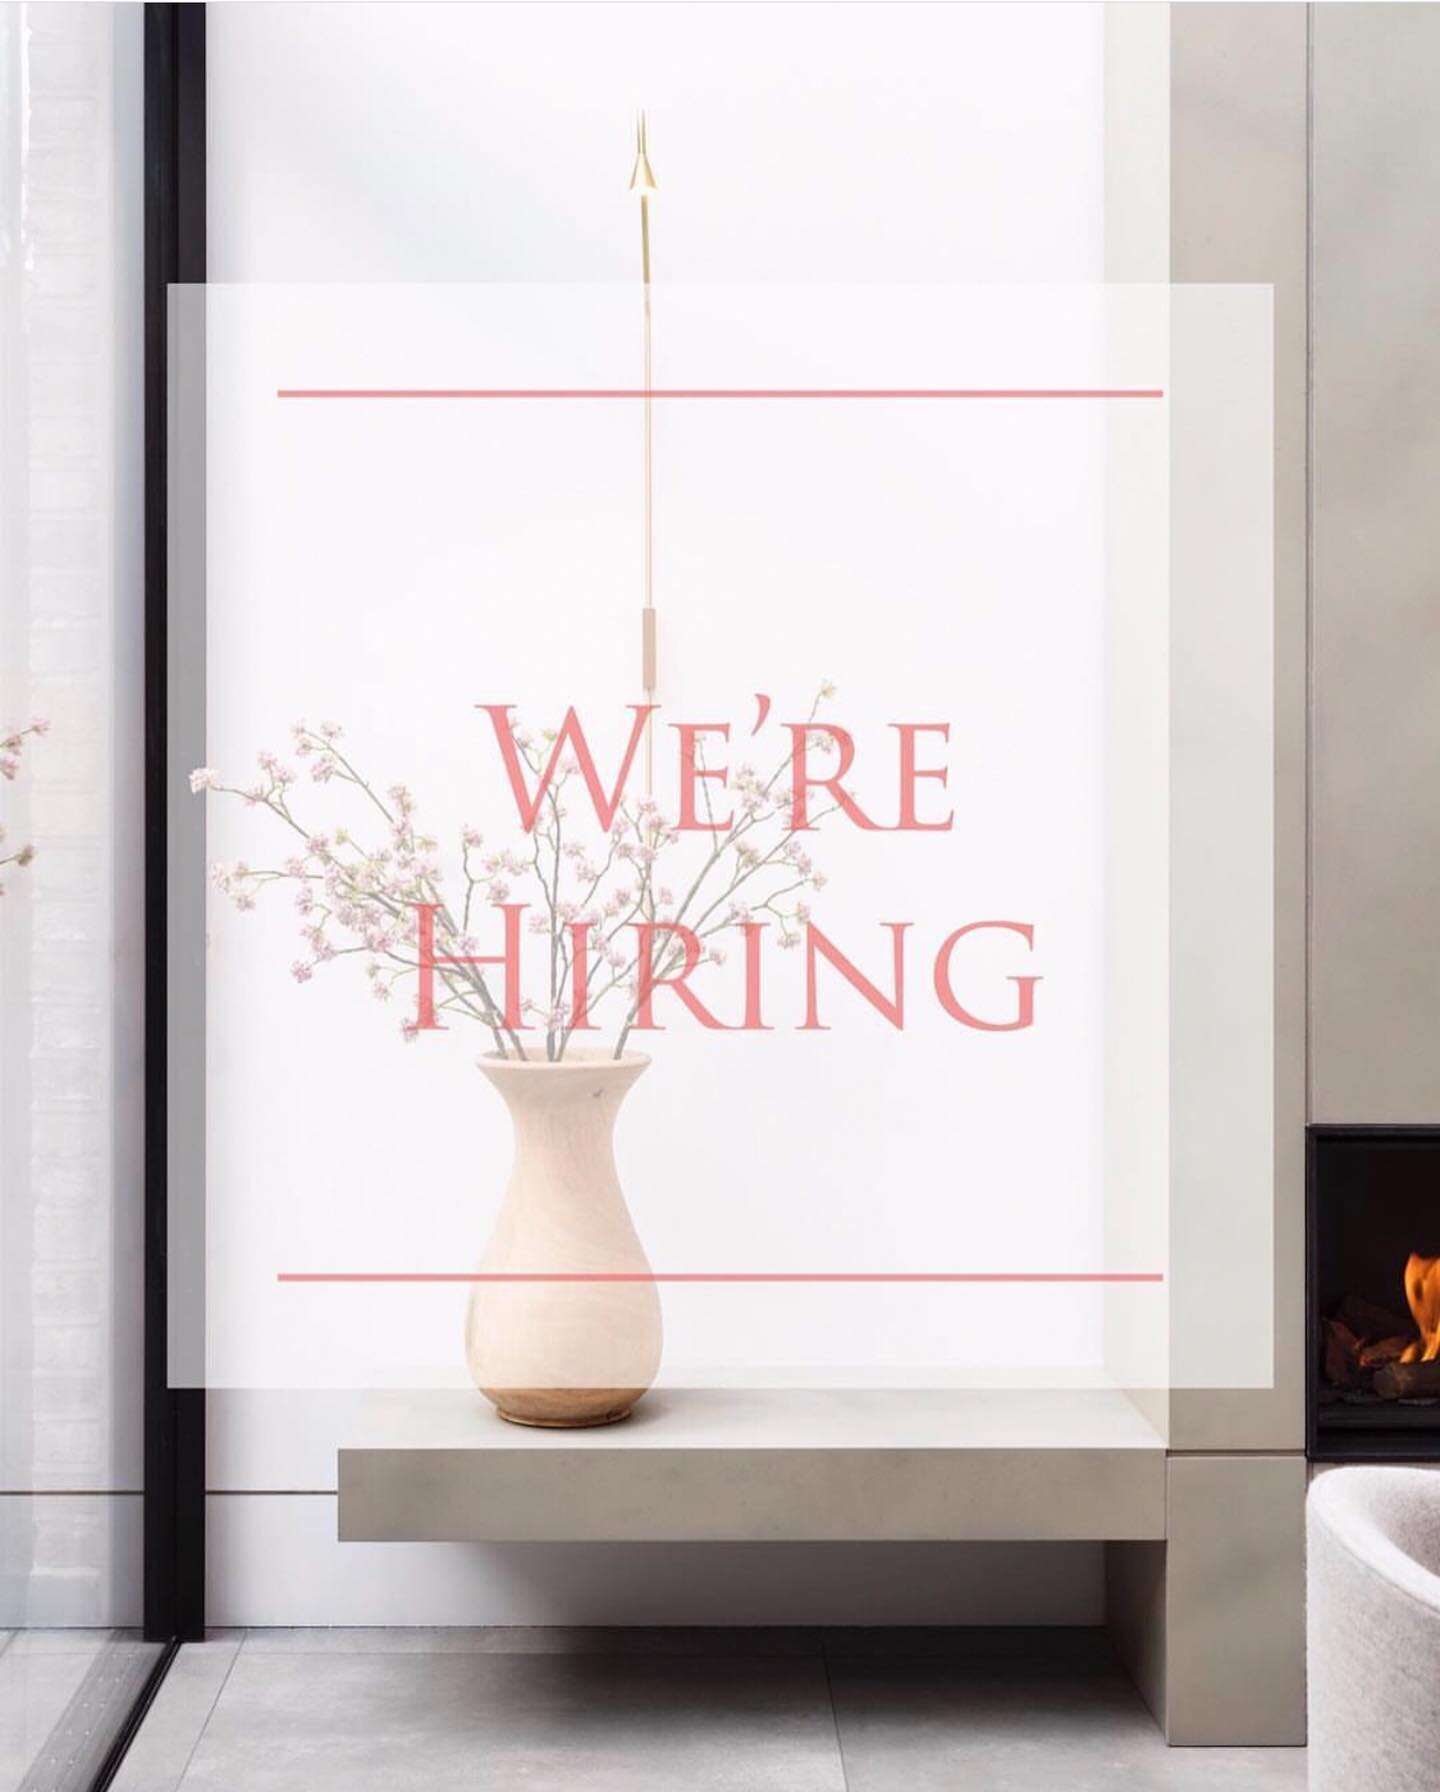 We are looking for a talented senior interior architect to join the growing team in our Oxfordshire studio. 
Read the full job description and apply through the link to our website in the bio @louiseholtdesign #interiordesign #ilovemyjob #jobsearch #